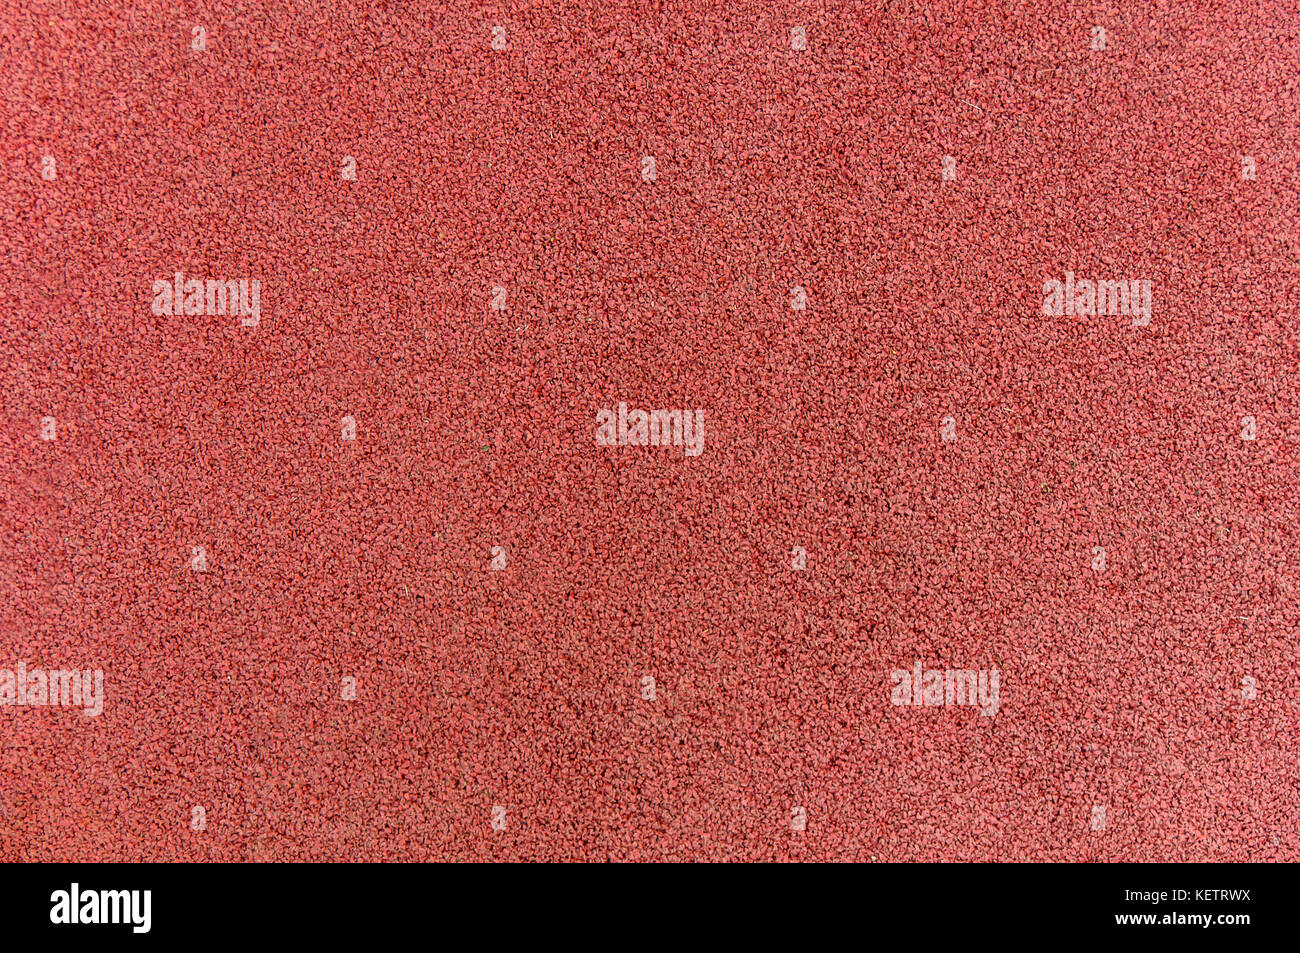 Premium Photo  Red rubber coating of playground background, texture